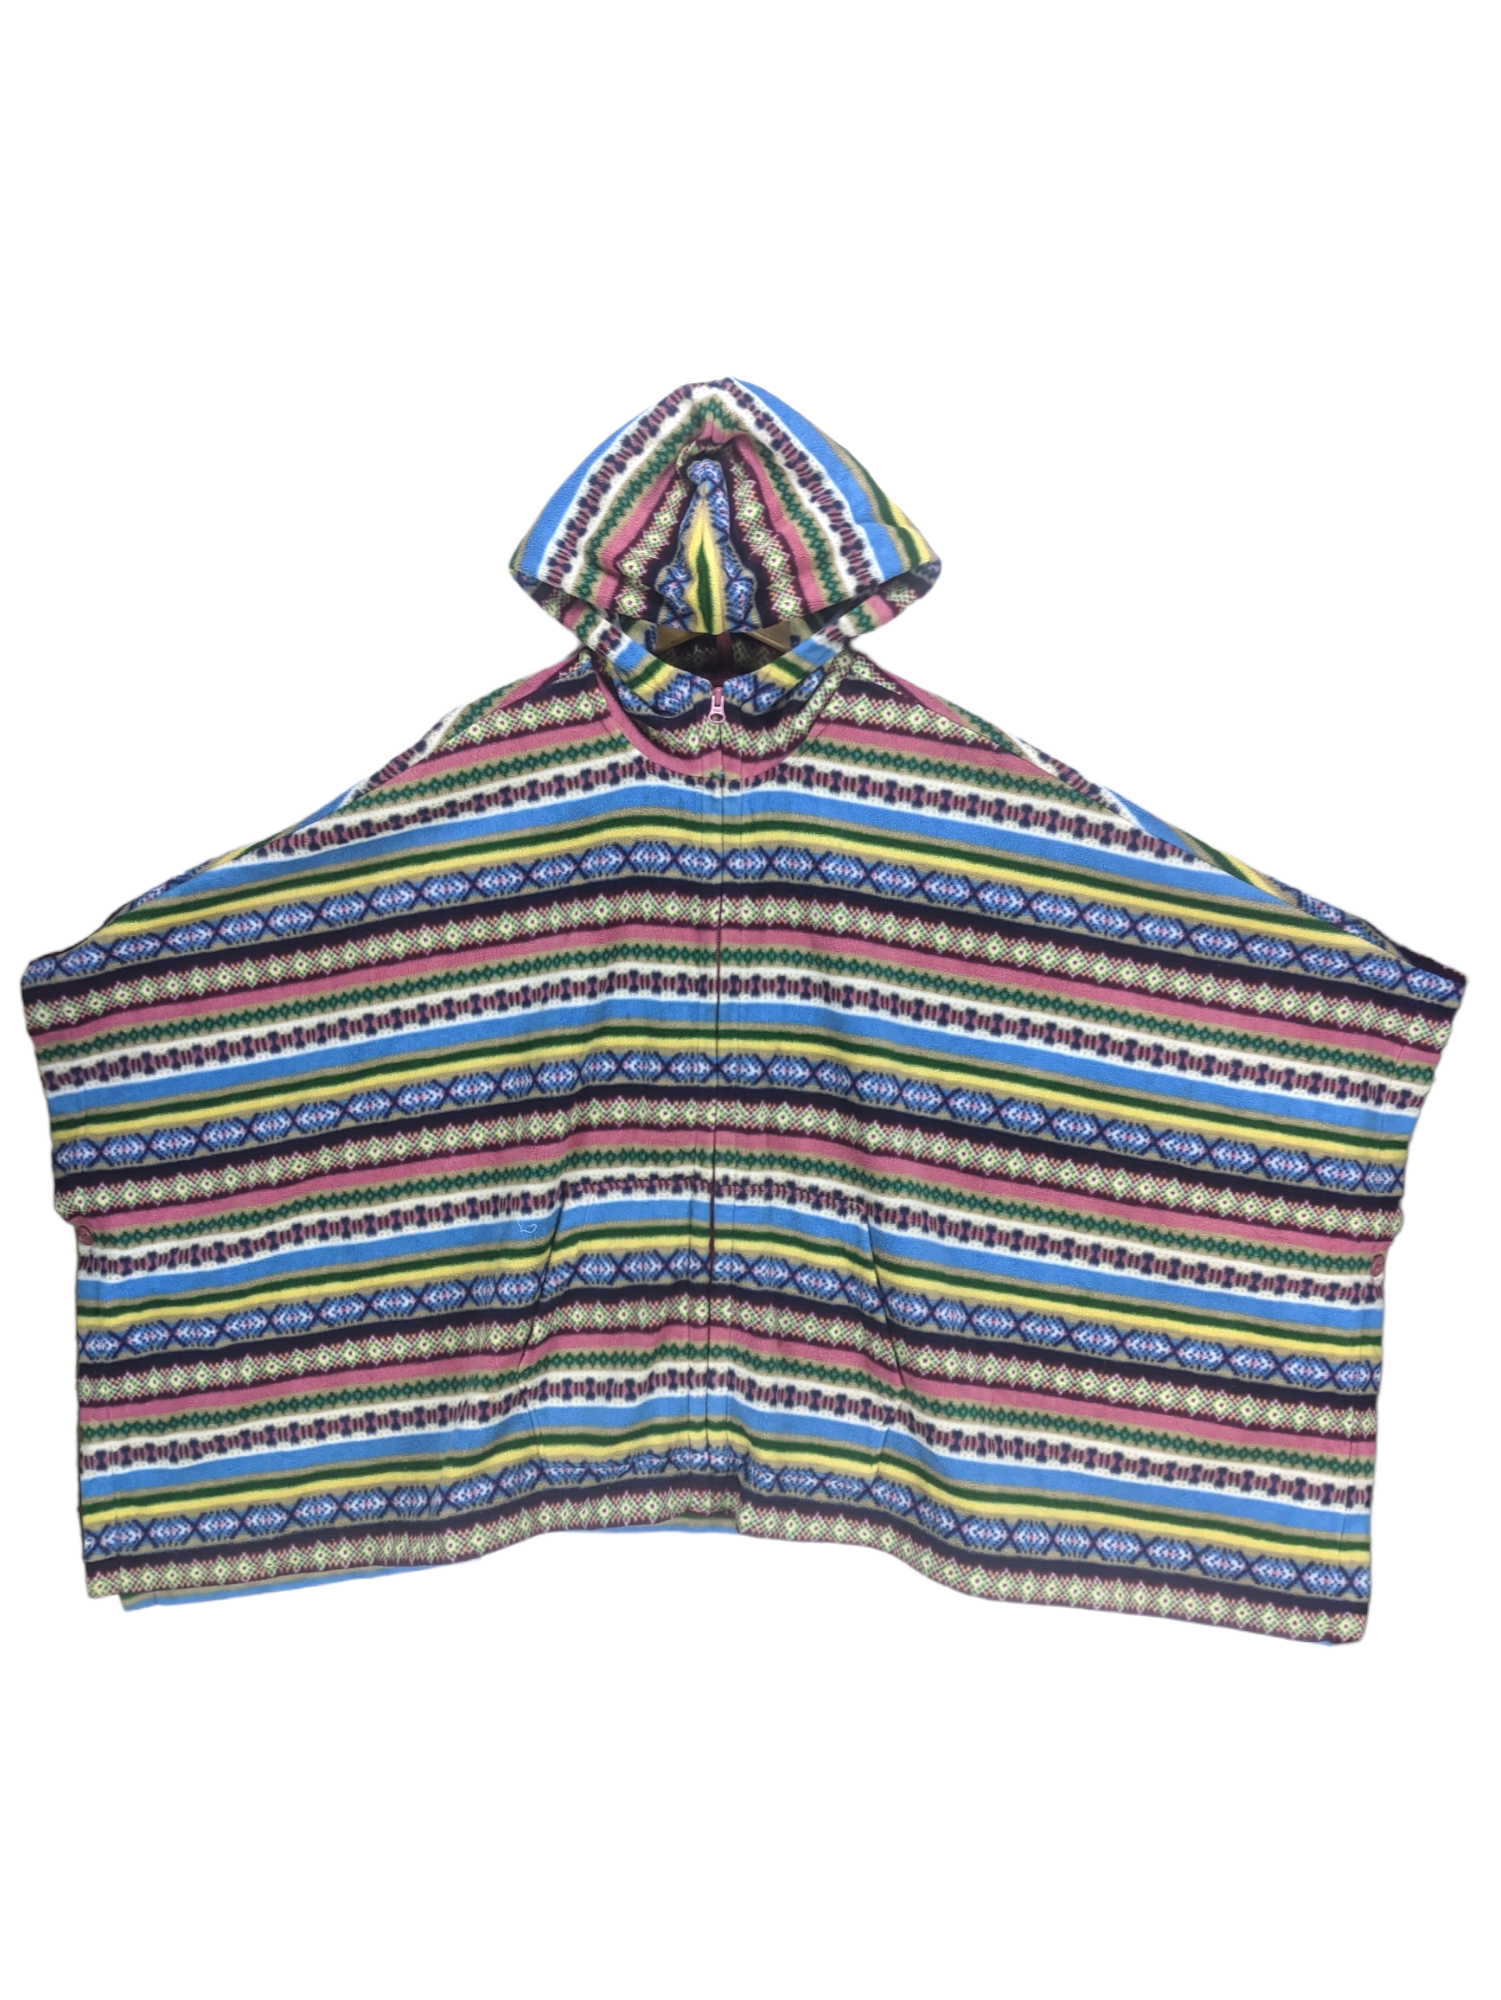 Uniqlo - Steals🔥Uniqlo Poncho Hooded Navajo Patterned - 5